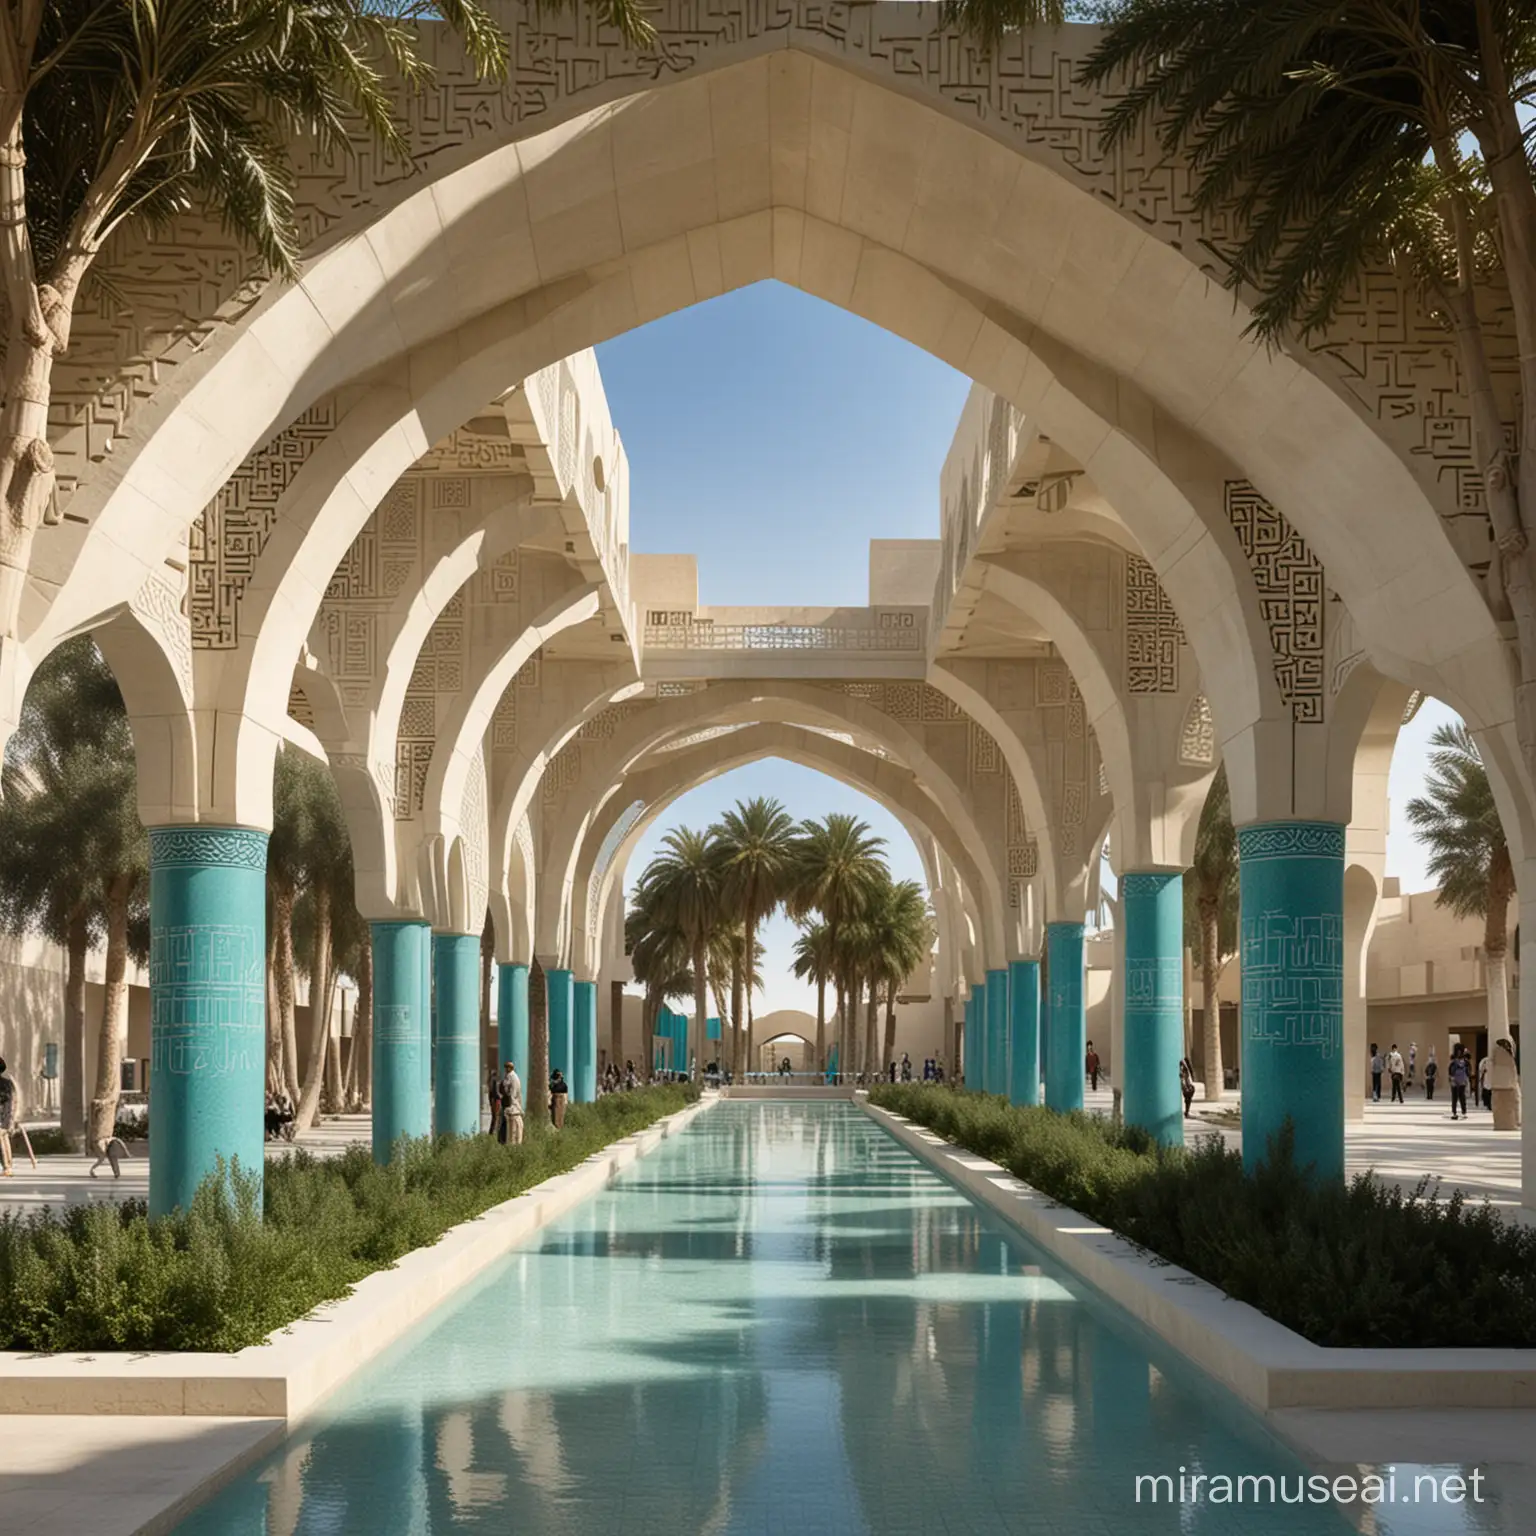 A modern iconic design for the Iraq Pavilion at the Baghdad International Fair, with a modern architectural design that combines Iraqi heritage, contemporaneity, and modernity. The design contains arches and arches, the use of square Kufic script, and the Babylonian turquoise color. The project contains hanging and terraced gardens, fountains, waterfalls, and